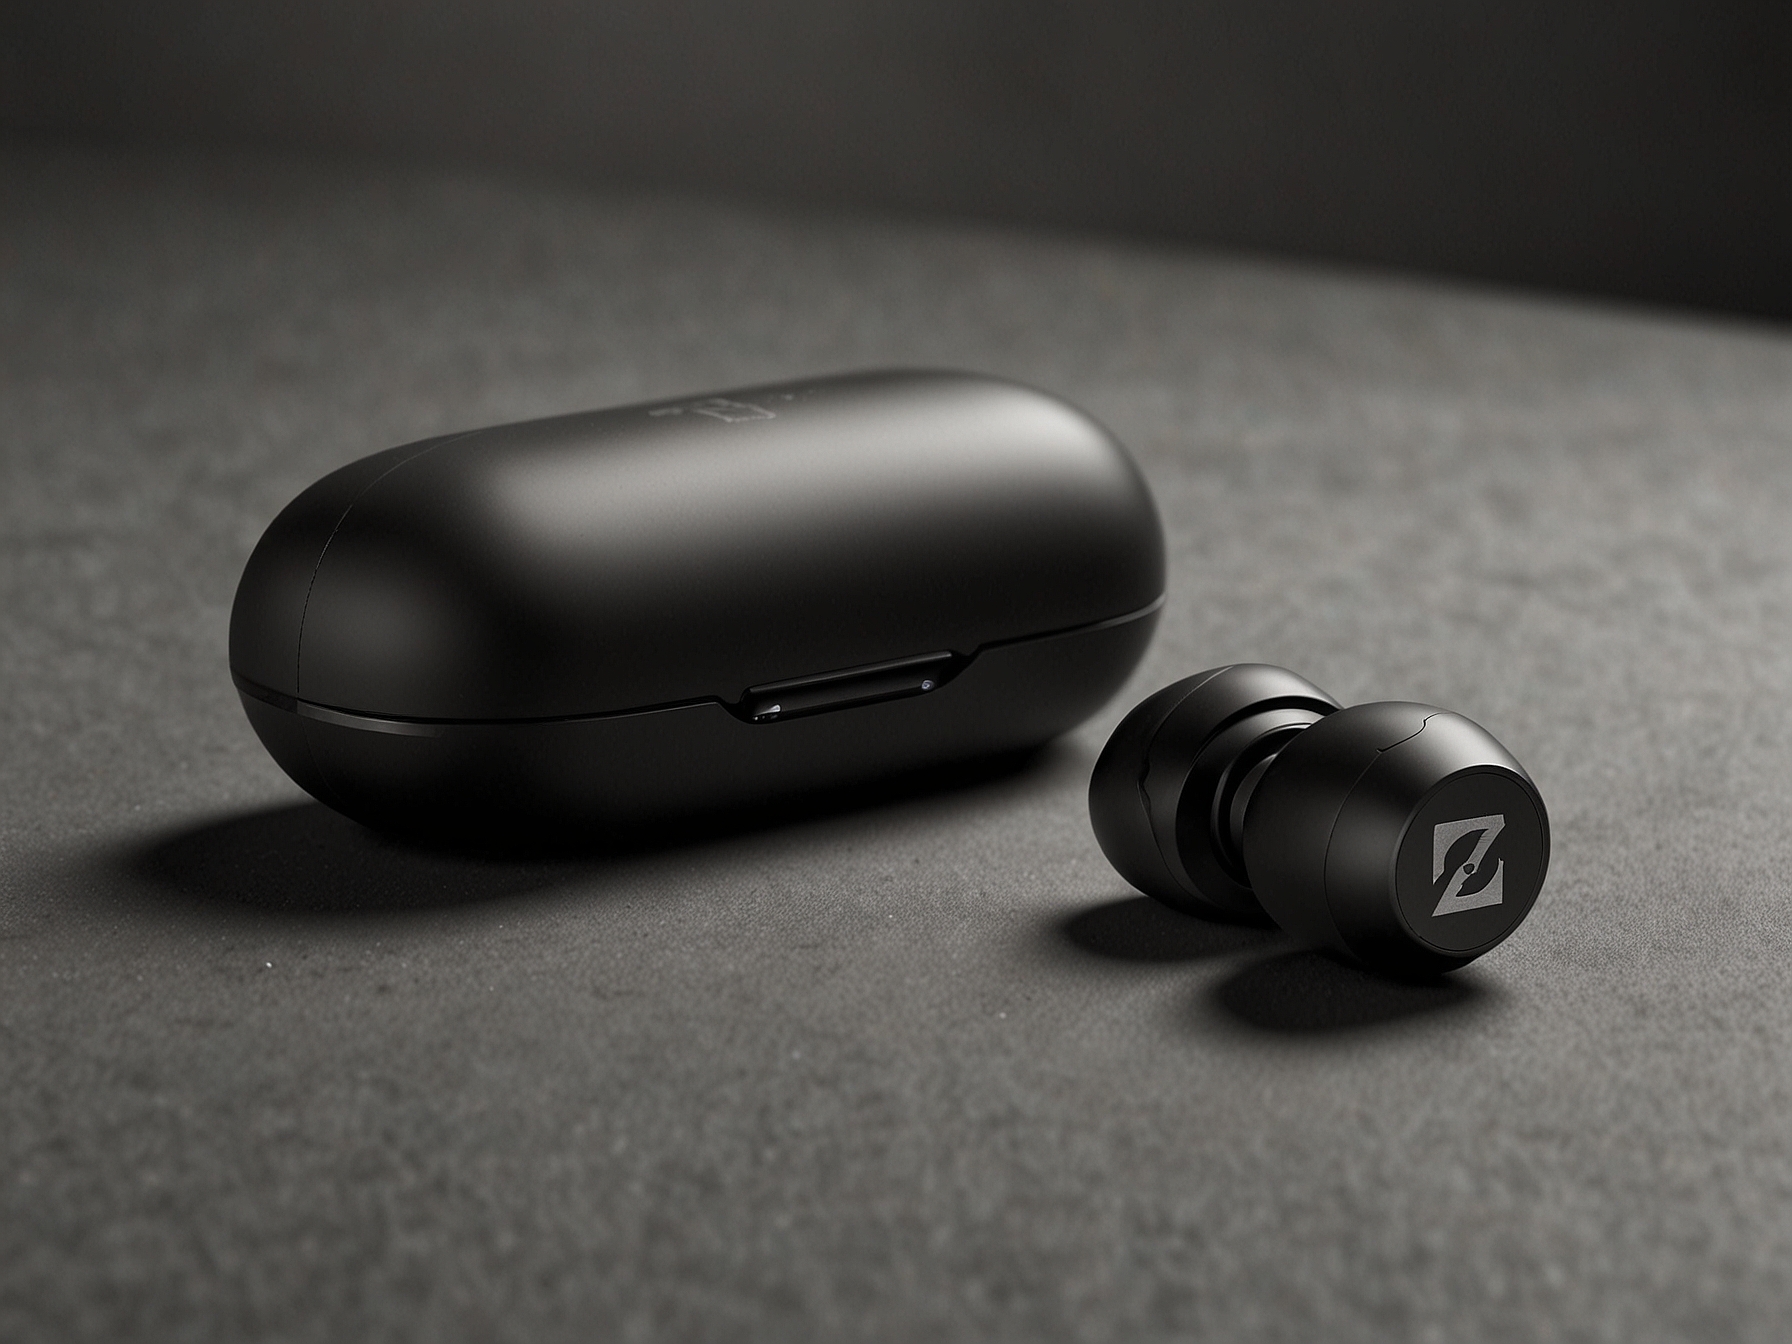 The Sennheiser Accentum True Wireless earbuds showcase a sleek design with a matte finish. They come with multiple silicone ear tips for a comfortable fit, ensuring long periods of usage without discomfort.